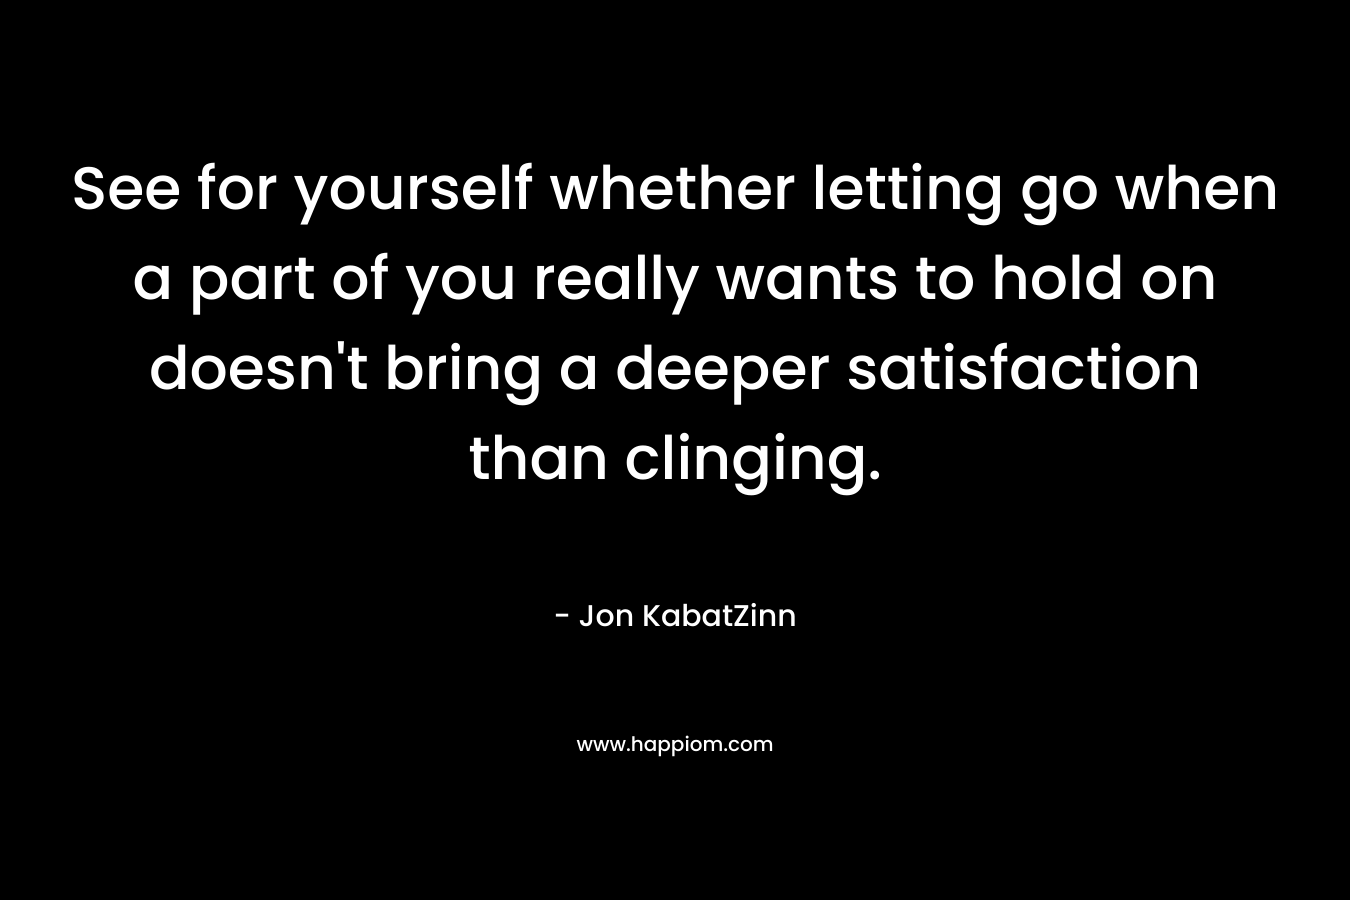 See for yourself whether letting go when a part of you really wants to hold on doesn’t bring a deeper satisfaction than clinging. – Jon KabatZinn